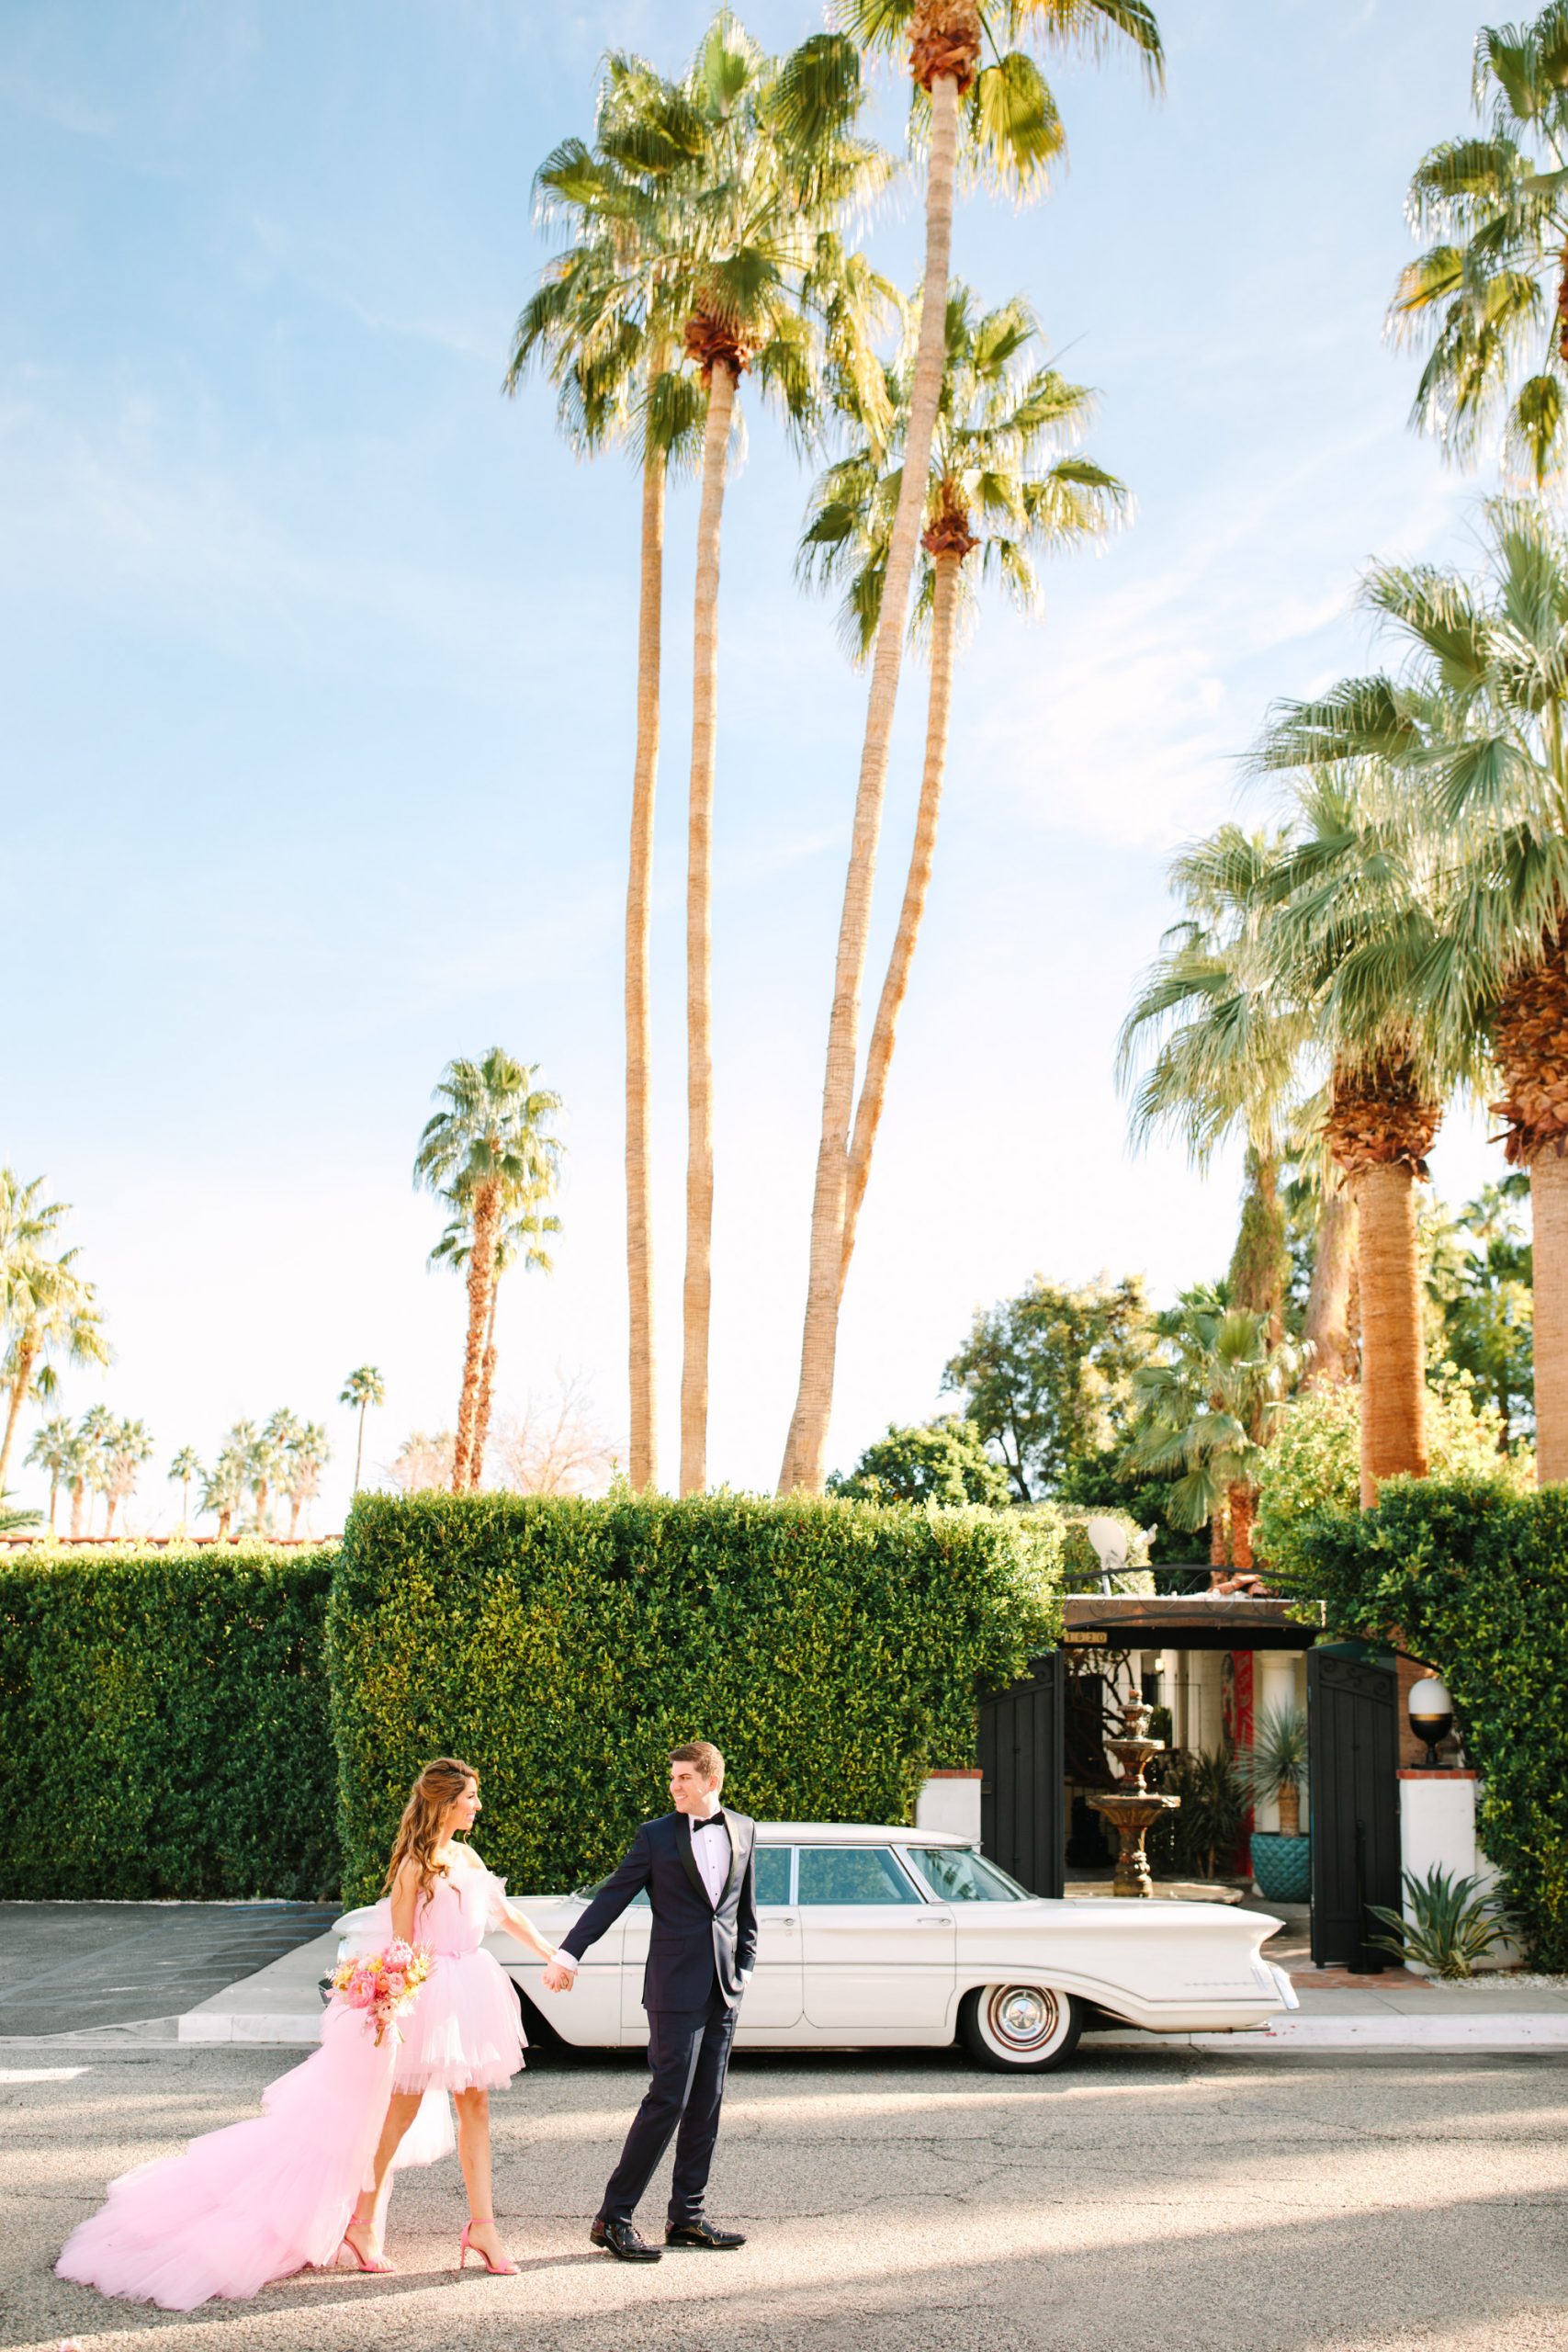 Pink wedding dress Palm Springs elopement featured on Green Wedding Shoes | Colorful mid-century modern wedding with Villa Royale Hotel backdrop | Vibrant and elevated wedding photos for fun-loving couples in Southern California #palmspringswedding #palmspringselopement #pinkwedding #greenweddingshoes Source: Mary Costa Photography | Los Angeles